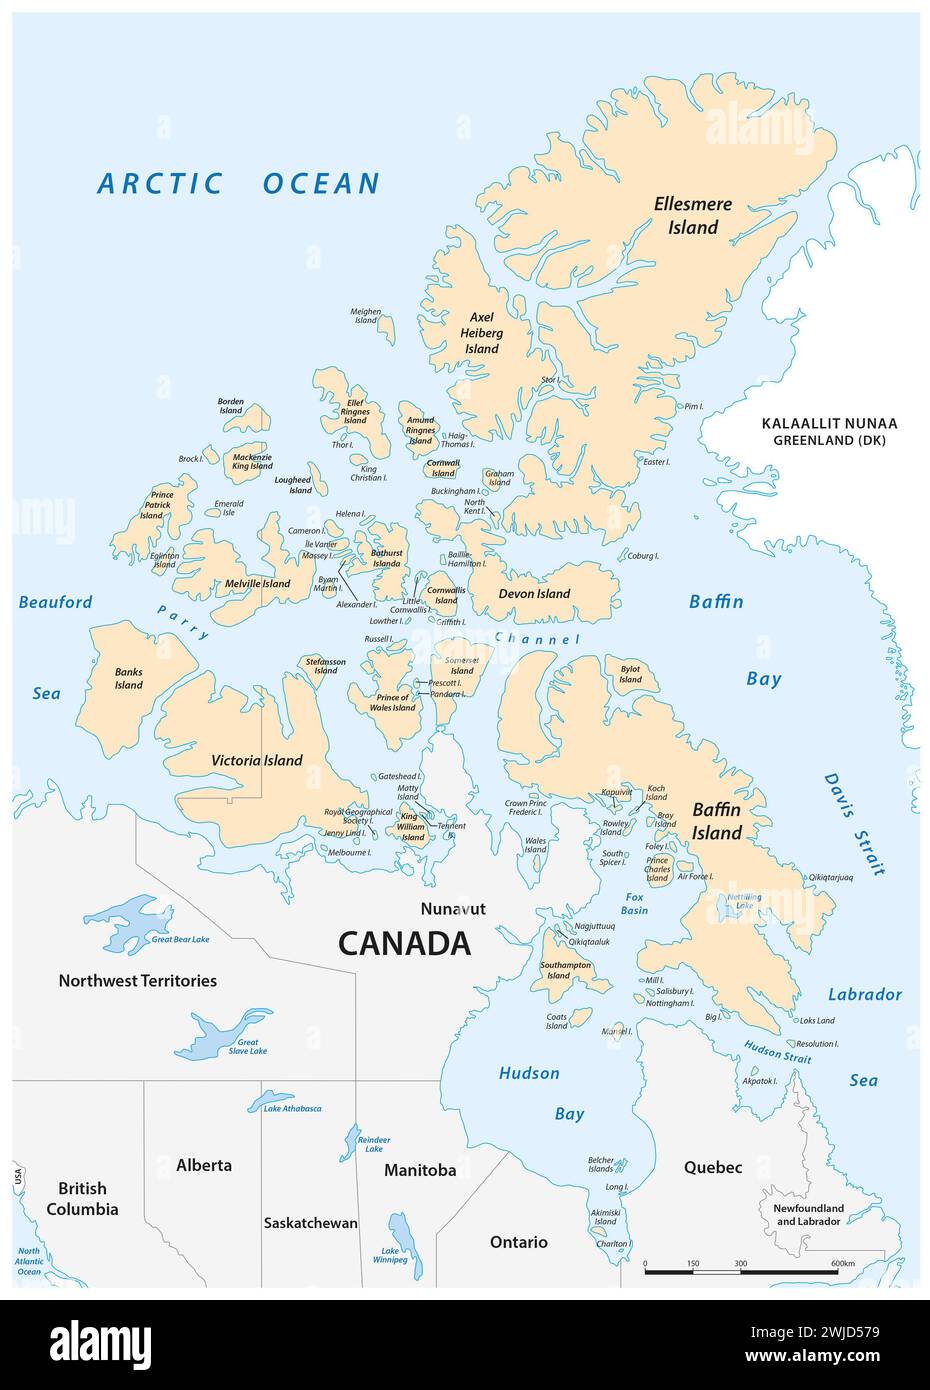 Detailed vector map of the Canadian Arctic Archipelago Stock Photo